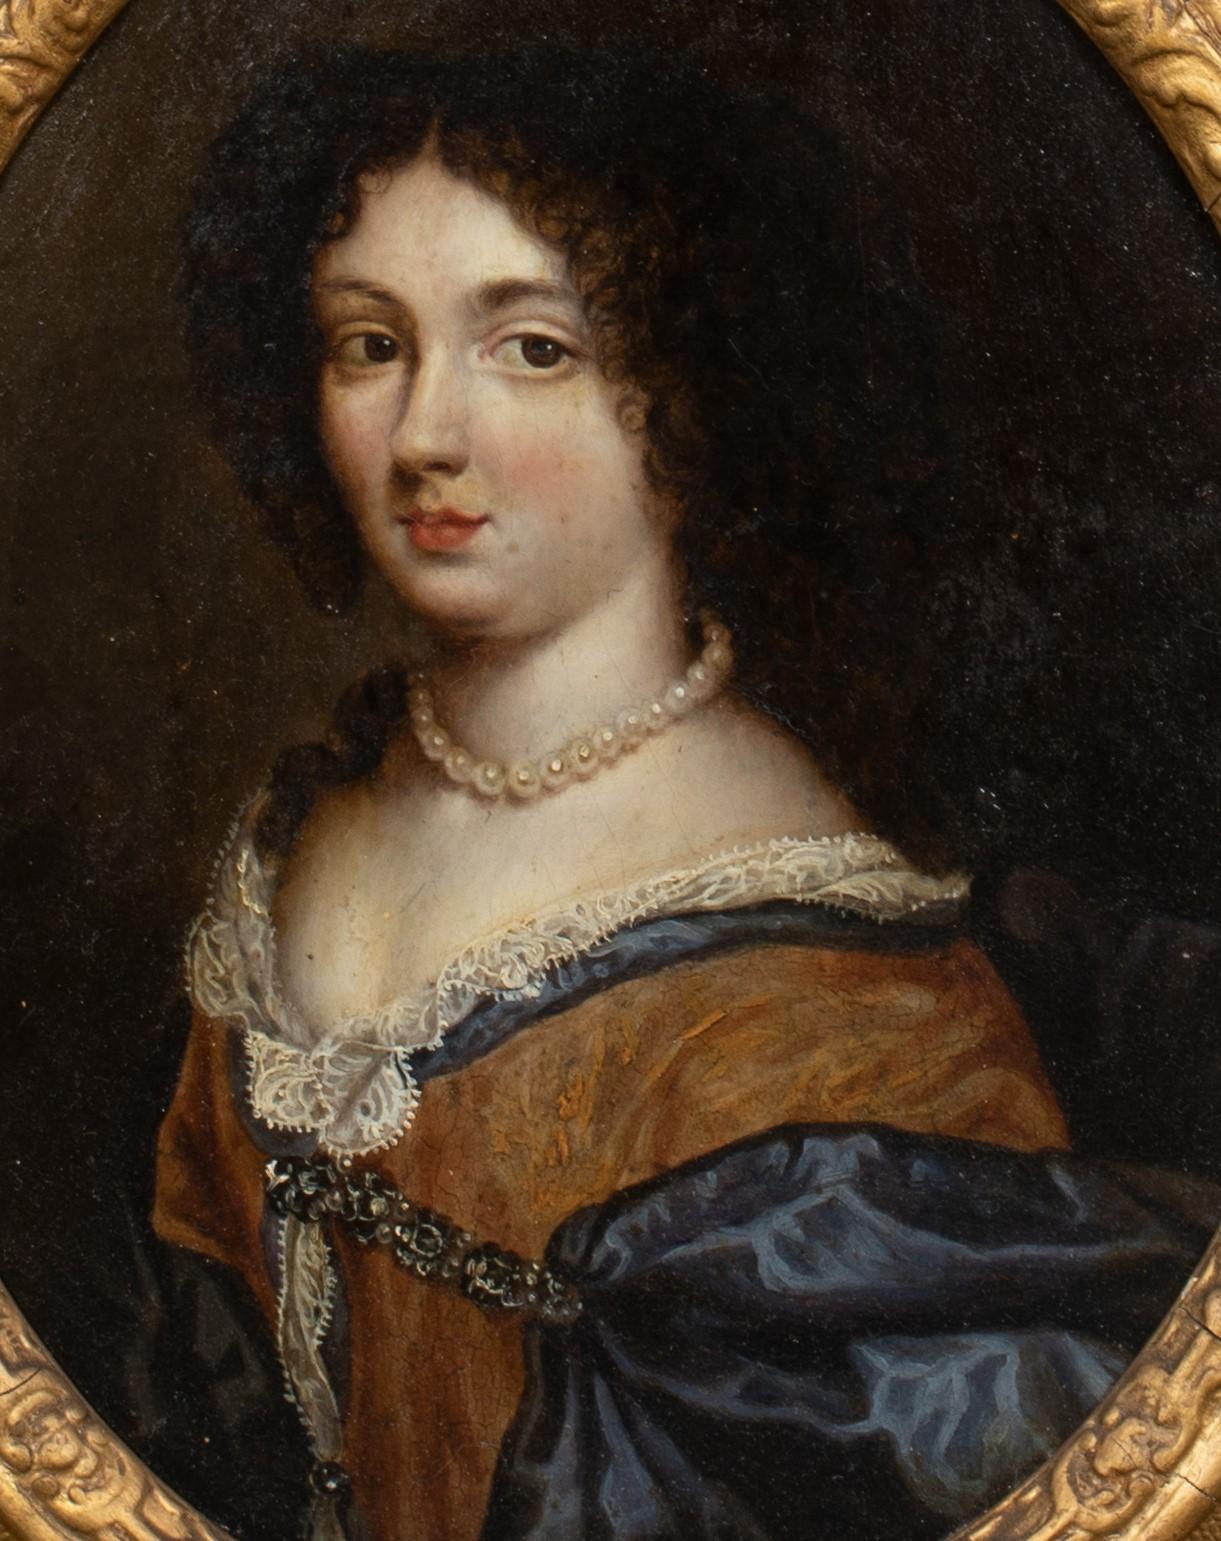 Portrait Of A Lady / Countess, 17th Century - Painting by Hyacinthe Rigaud